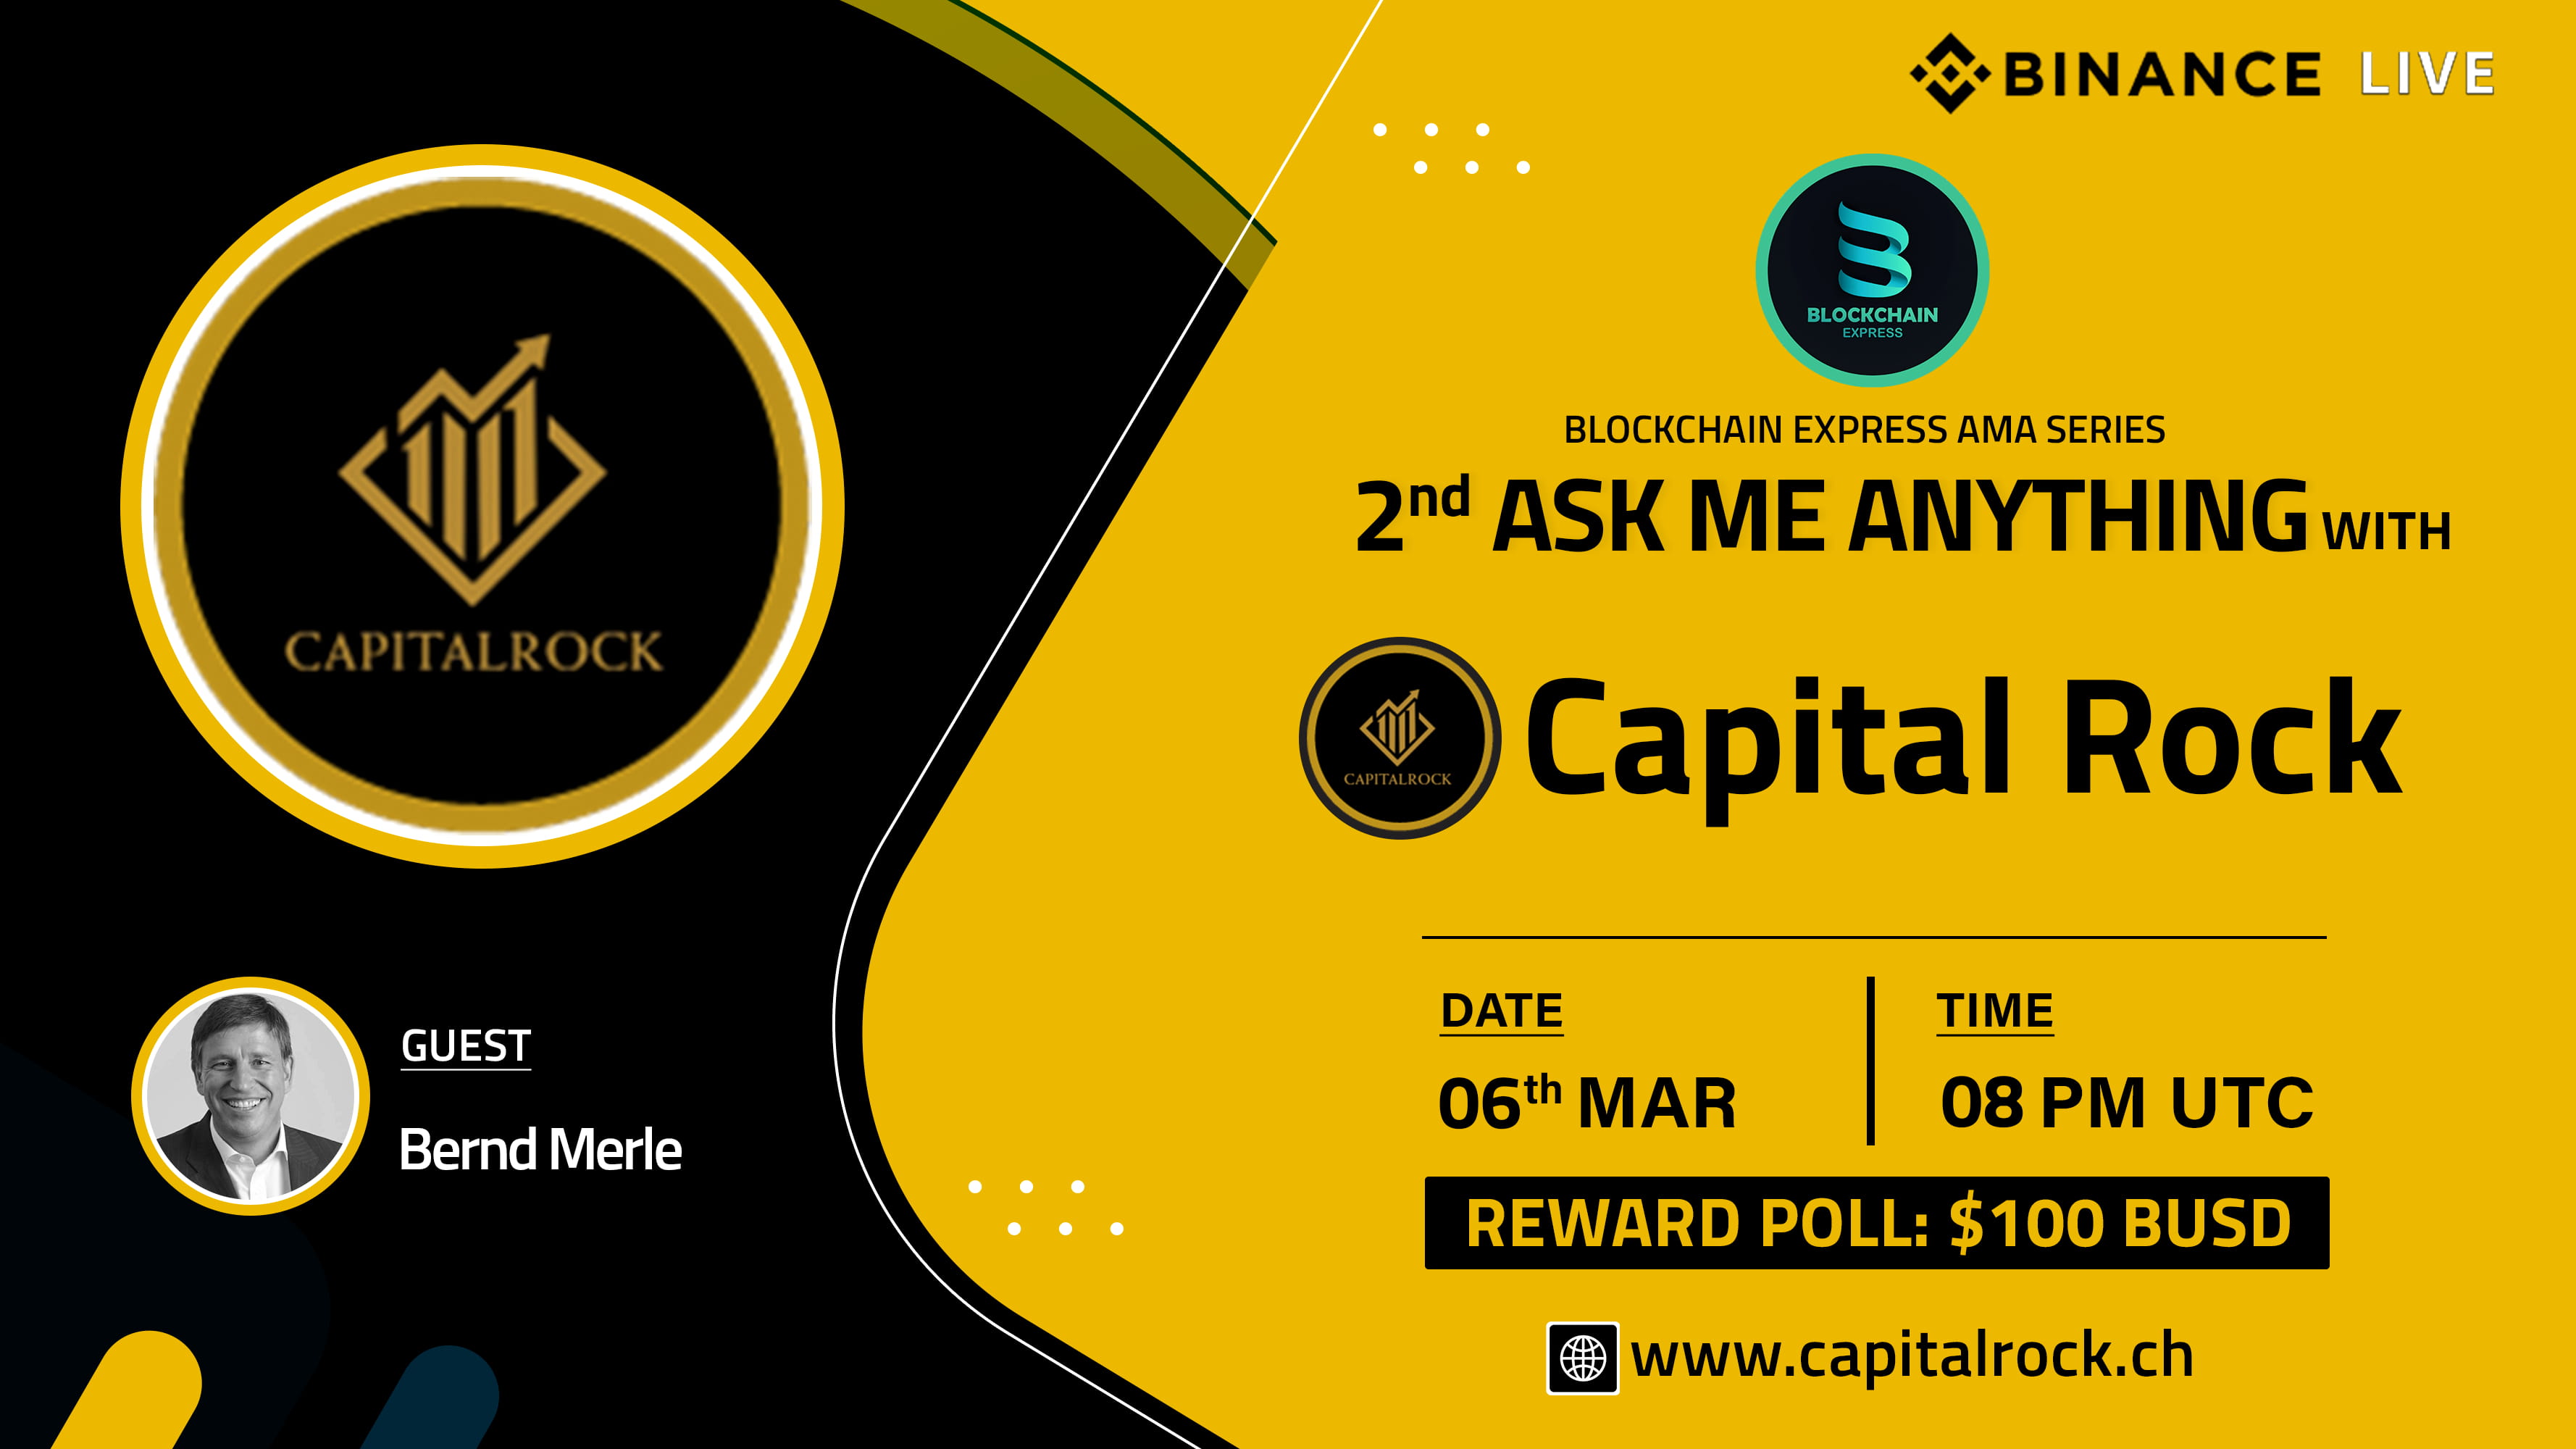 ₿lockchain Express will be hosting an 2nd Time session with Capital Rock